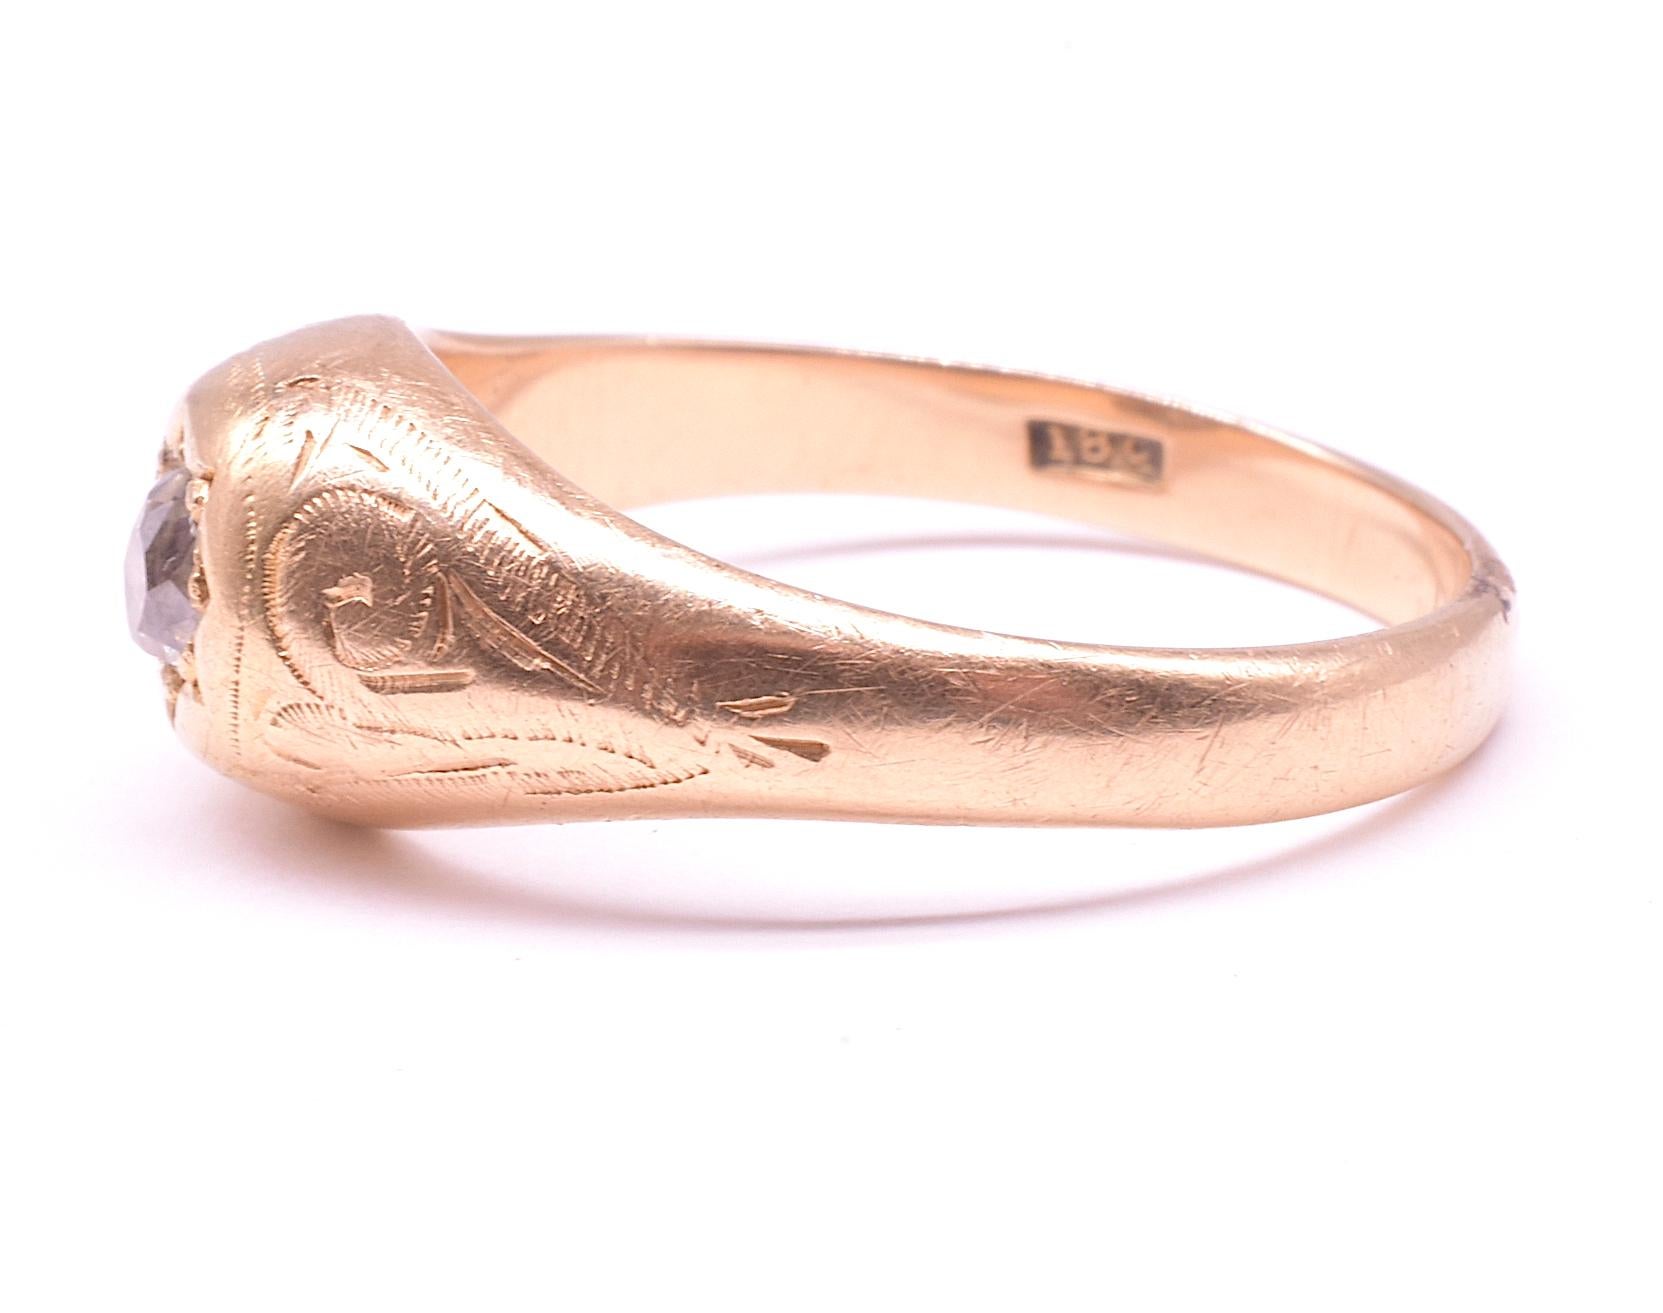 Charming 18K Victorian flush mount ring with a solitaire diamond set in an unusual carved pointed petal setting with incised flourishes along the shoulders which are a nice detail. This type of mounting was popular through the 19th century and into